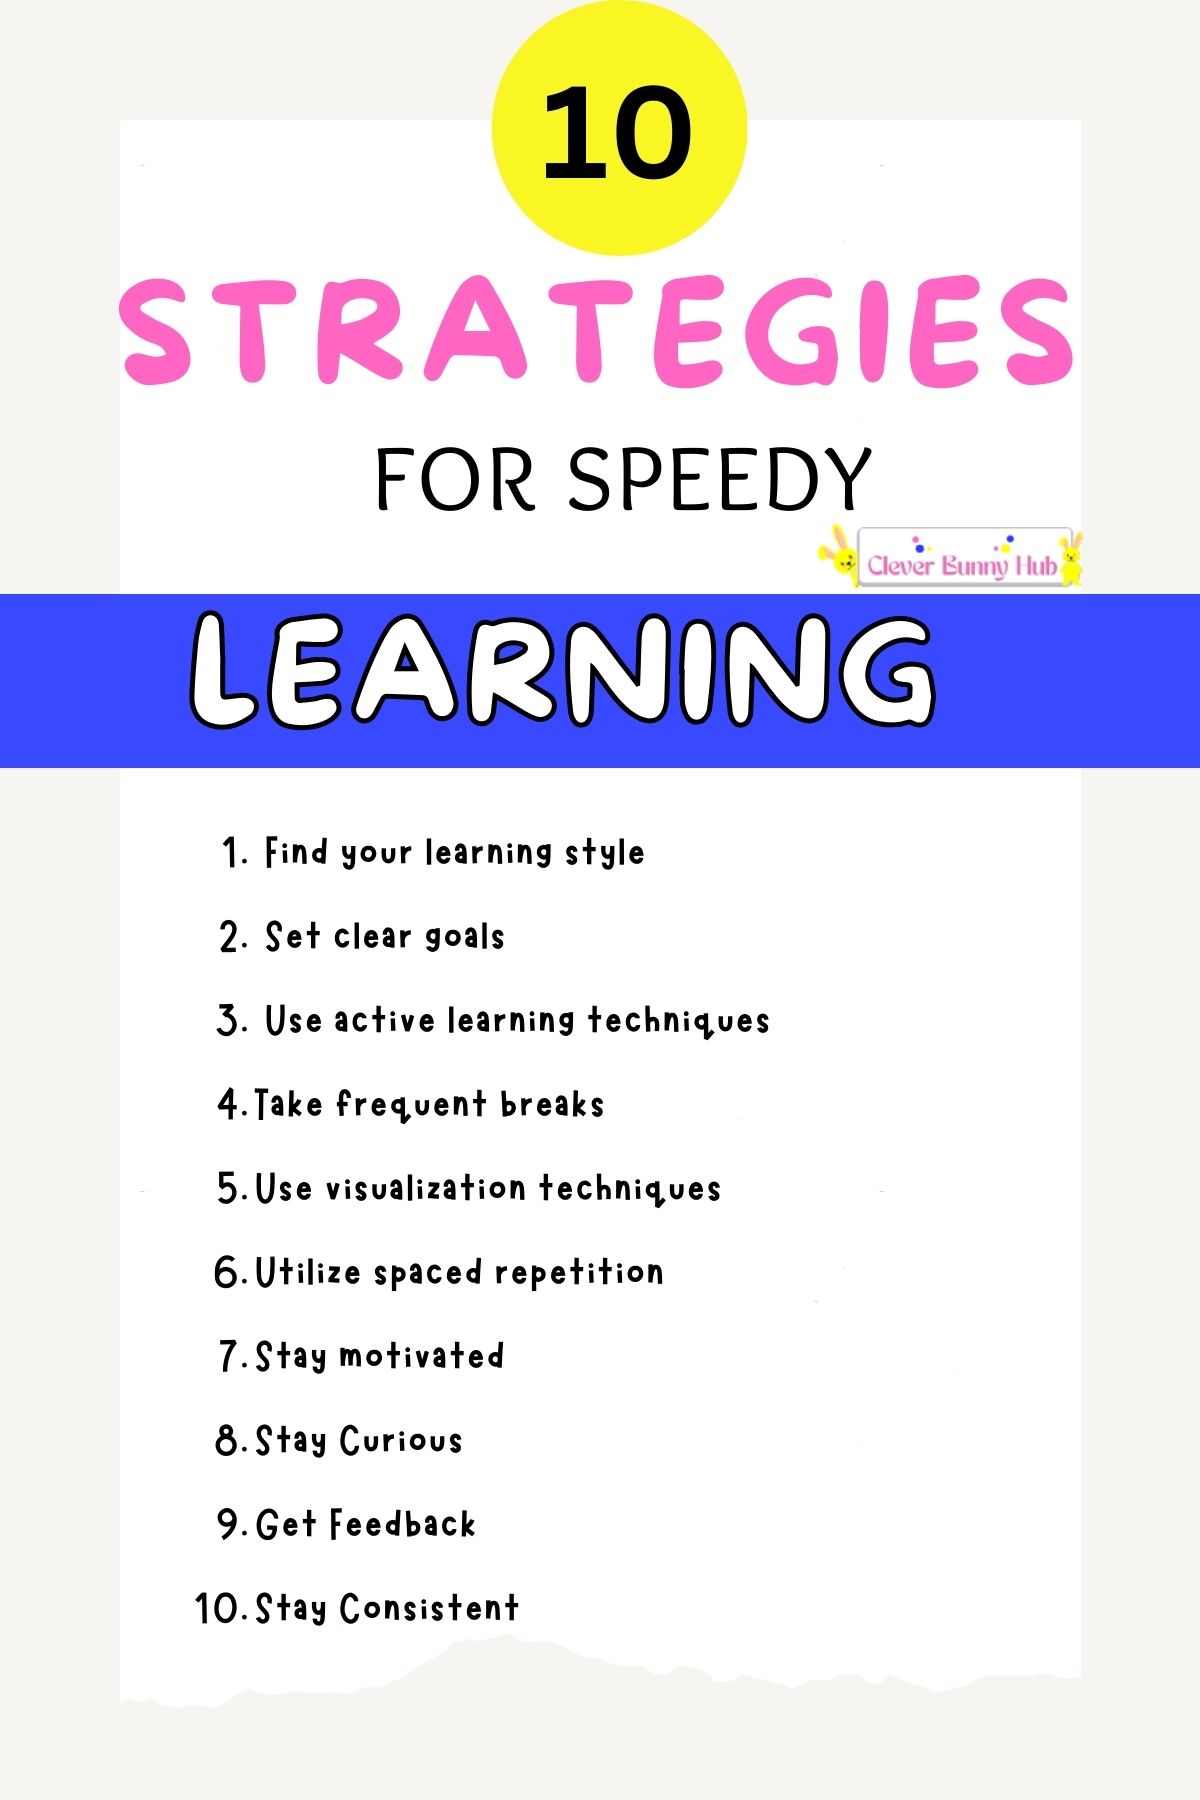 How To Learn Faster: Top 10 Strategies For Speedy Learning